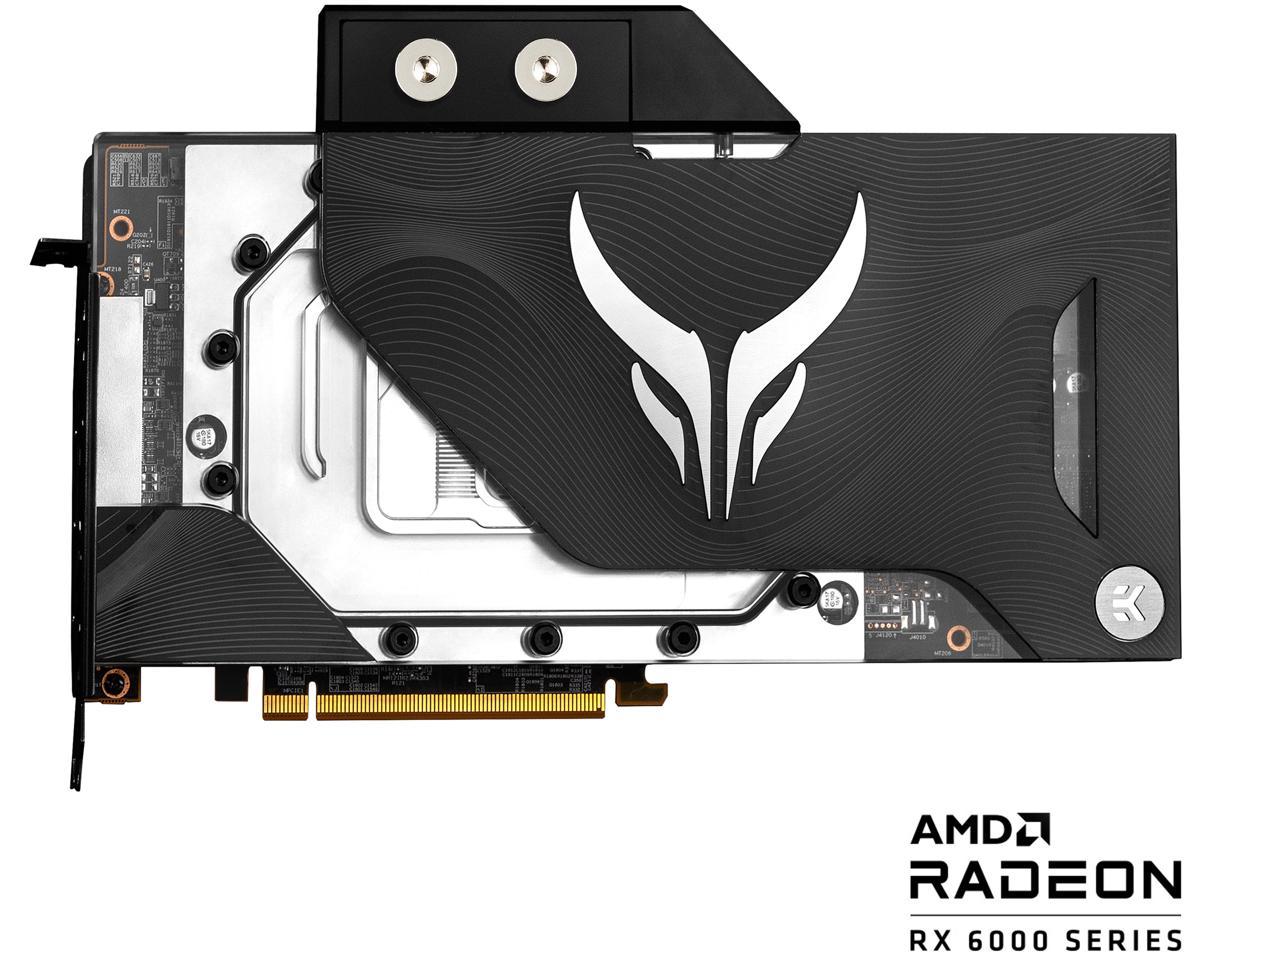 PowerColor Liquid Devil AMD Radeon RX 6900 XT Ultimate Gaming Graphics Card  with 16GB GDDR6 Memory, Powered by AMD RDNA 2, HDMI 2.1 (AXRX 6900XTU 